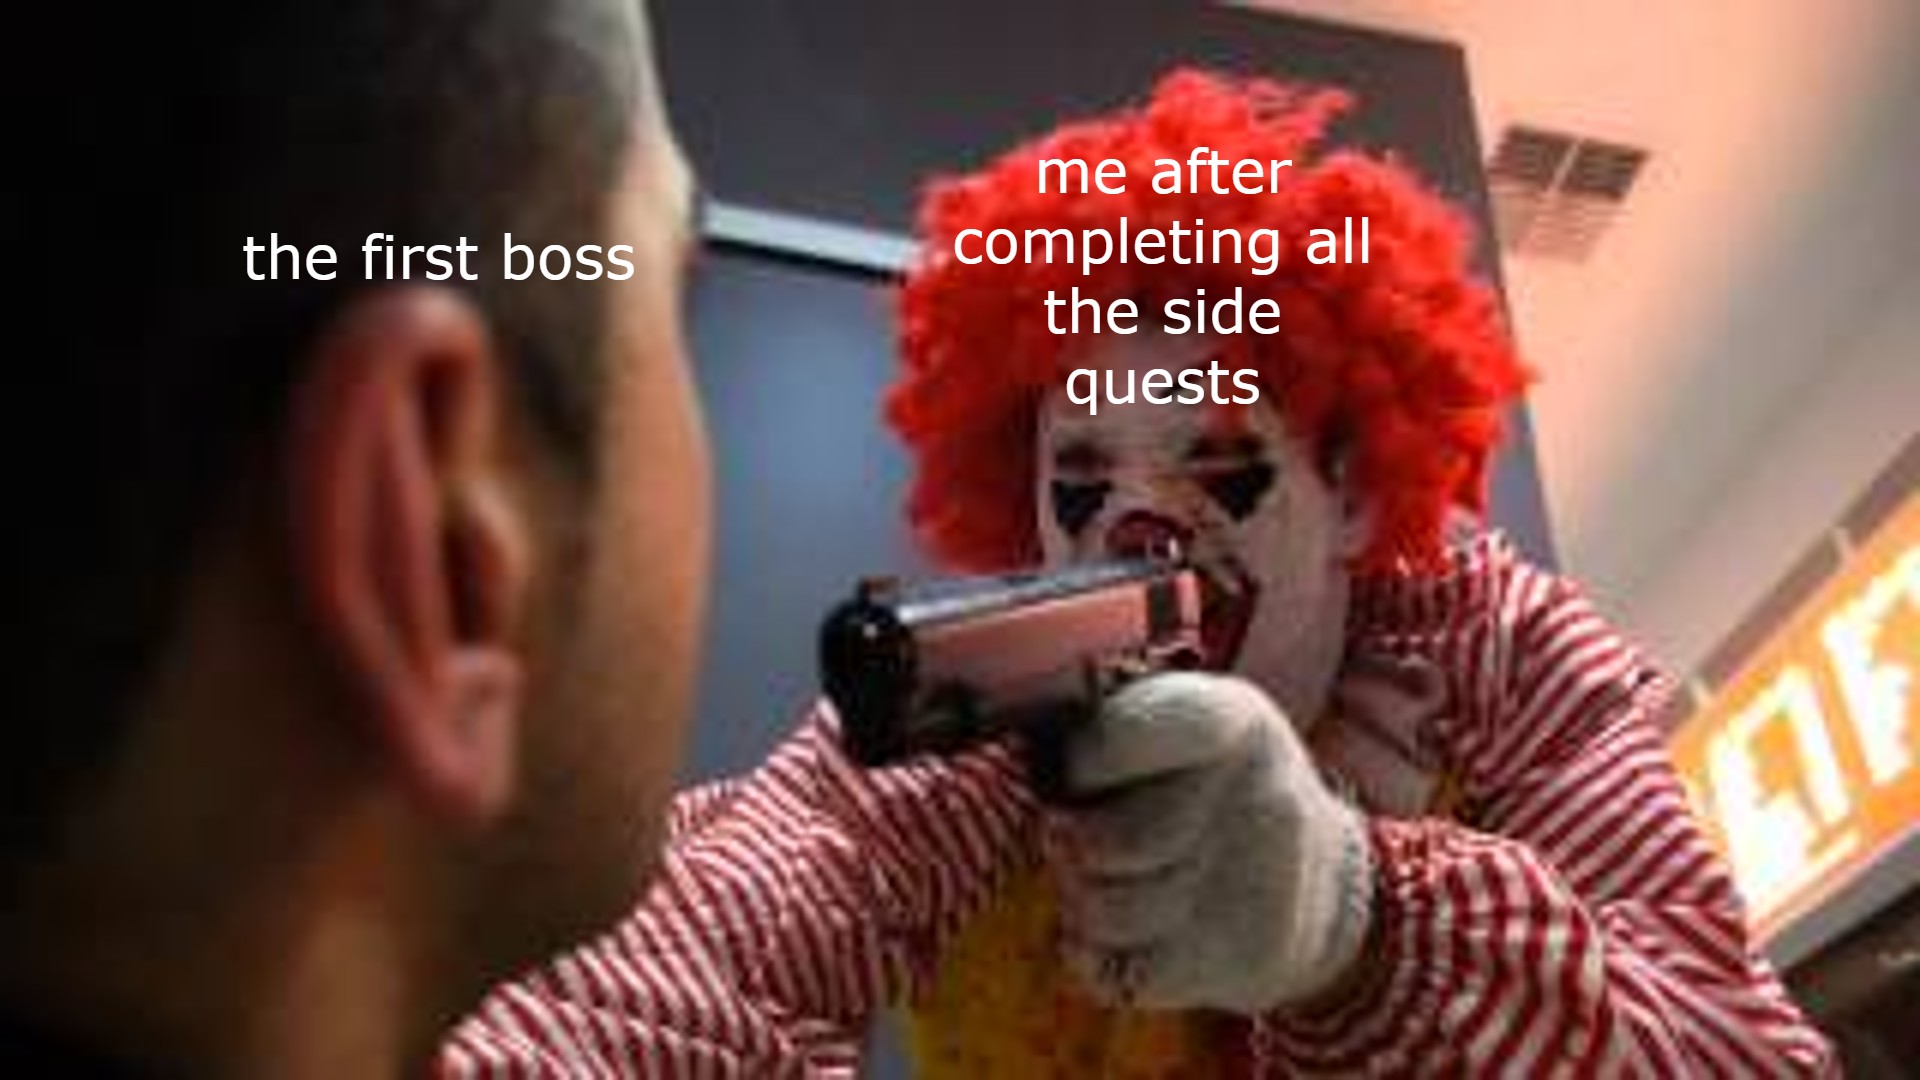 ronald mcdonald exe - the first boss me after completing all the side quests 7